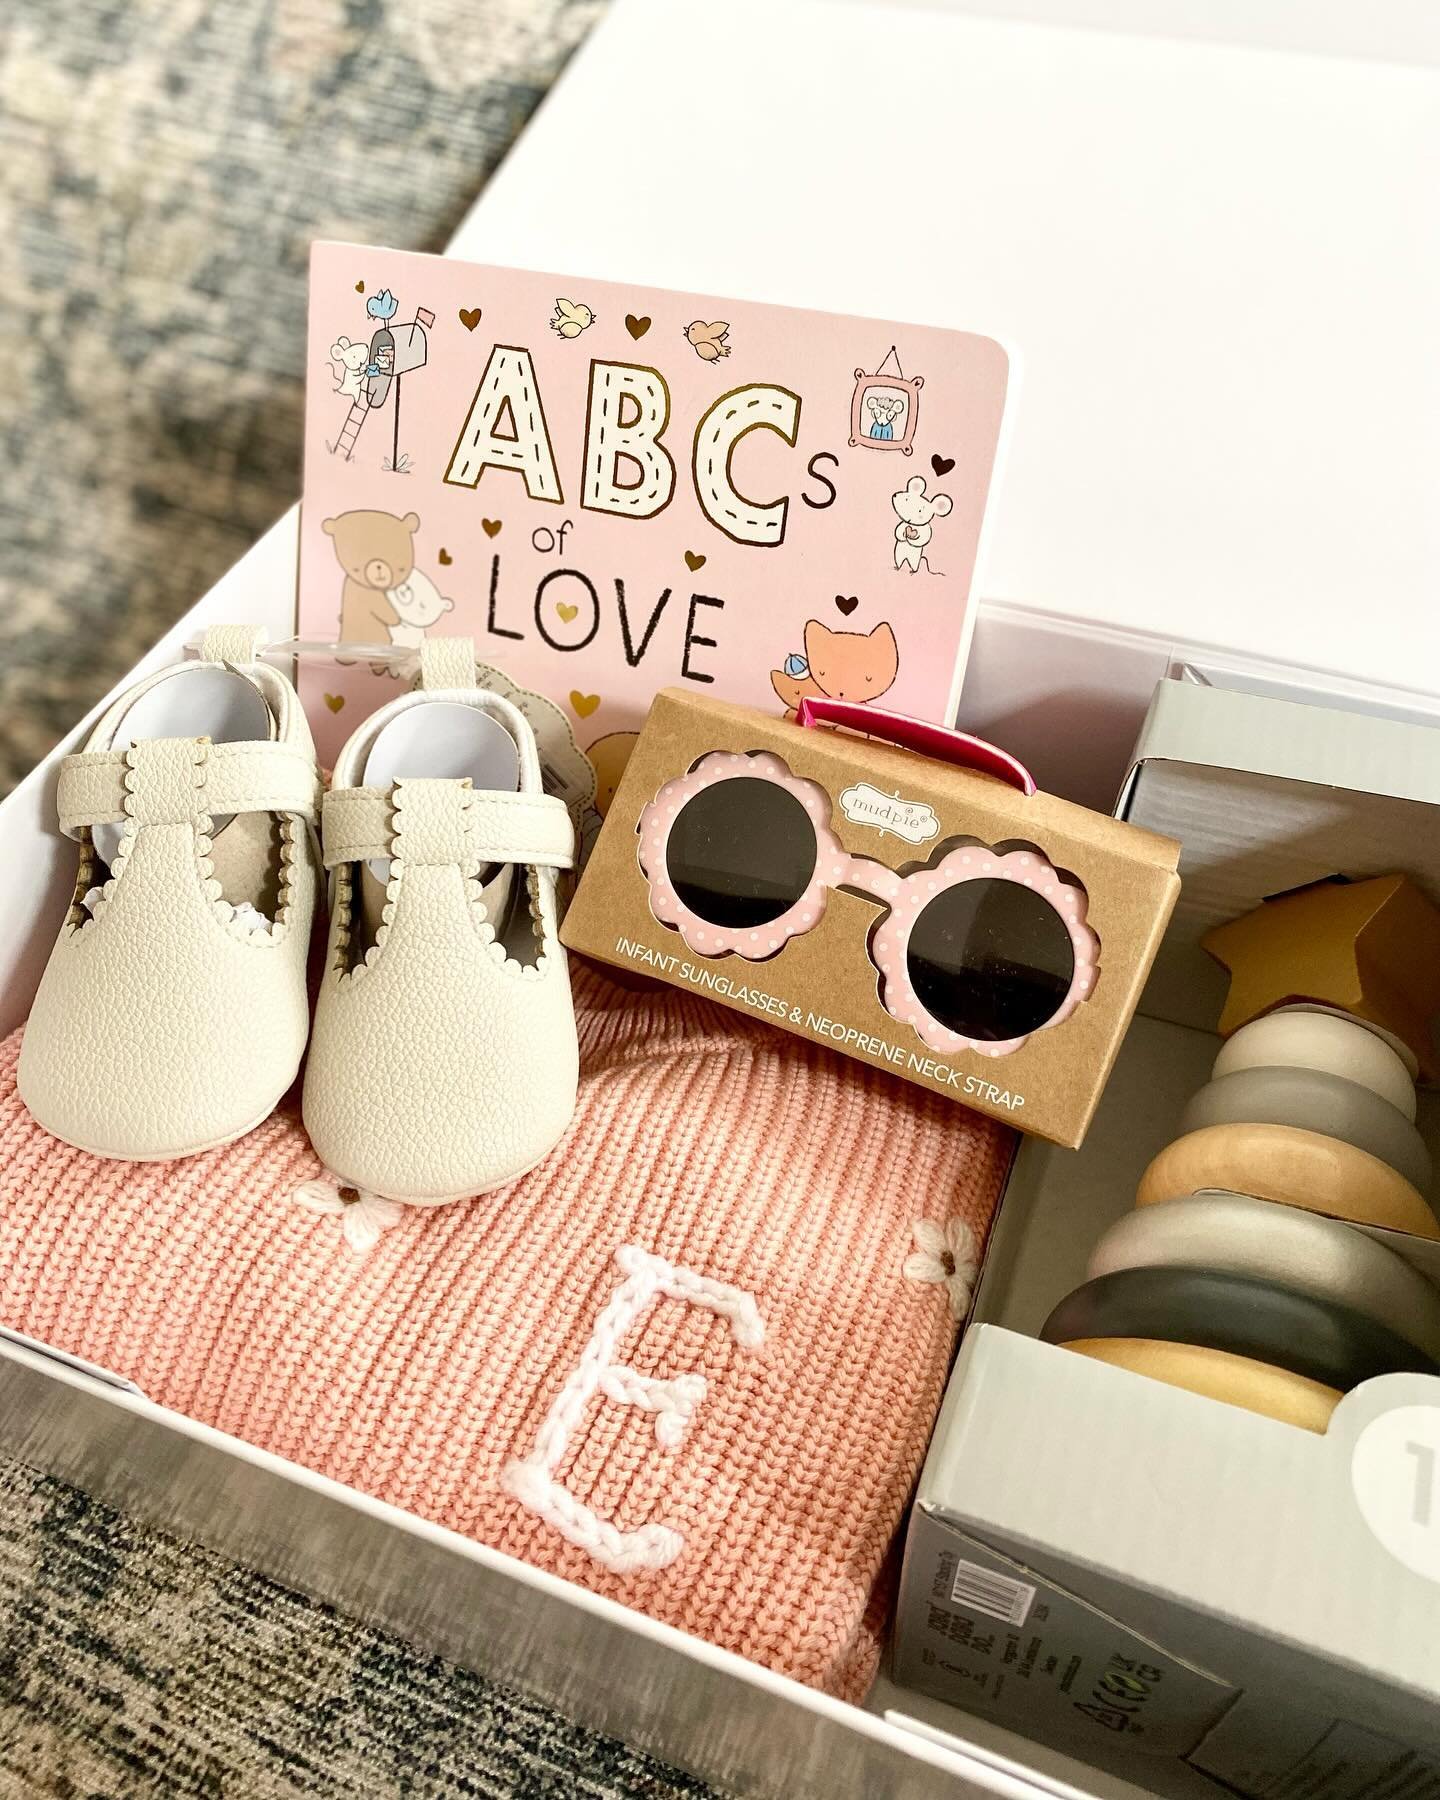 Why does everything feel more bougie in a magnetic closure box?! 💅🏻🤌🏻 We put together the cutest Apparel Gift Bundle for Emmanuelle 💕 Our signature knit sweater alongside a pair of the tiniest leather booties, ABCs of Love board book, a wooden t